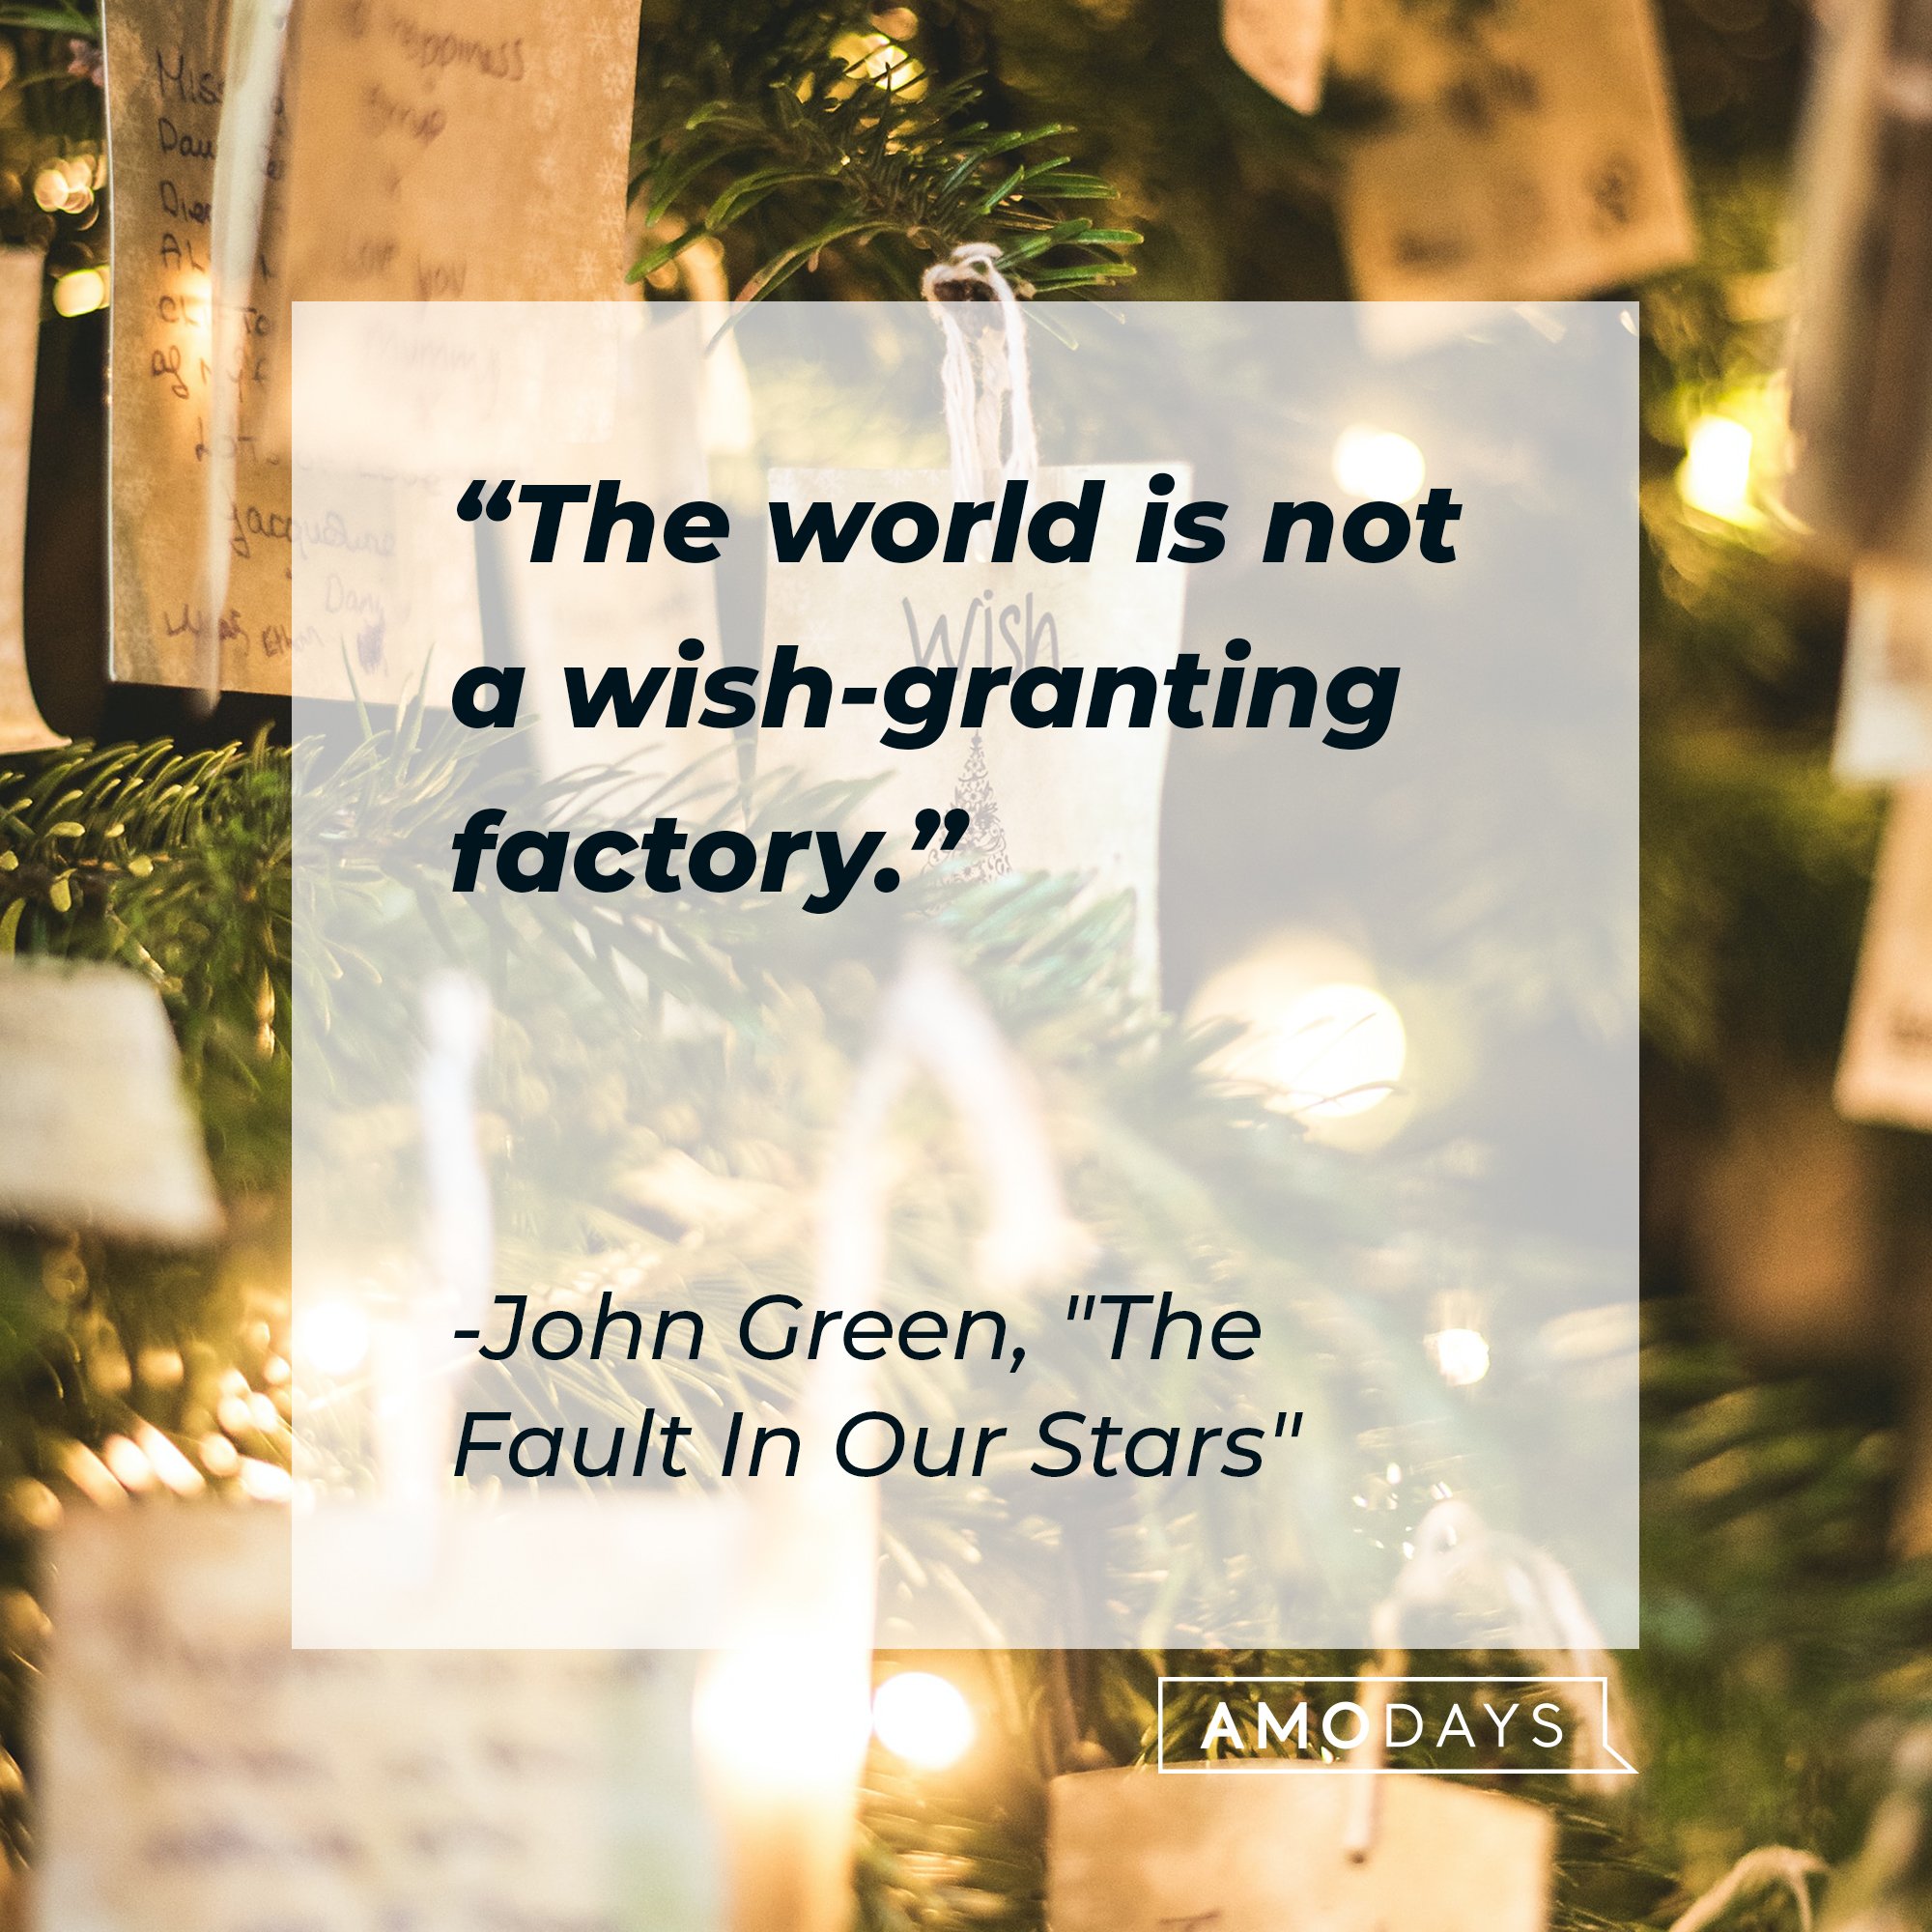 John Green’s quote from "The Fault In Our Stars" : "The world is not a wish-granting factory." | Image: AmoDays